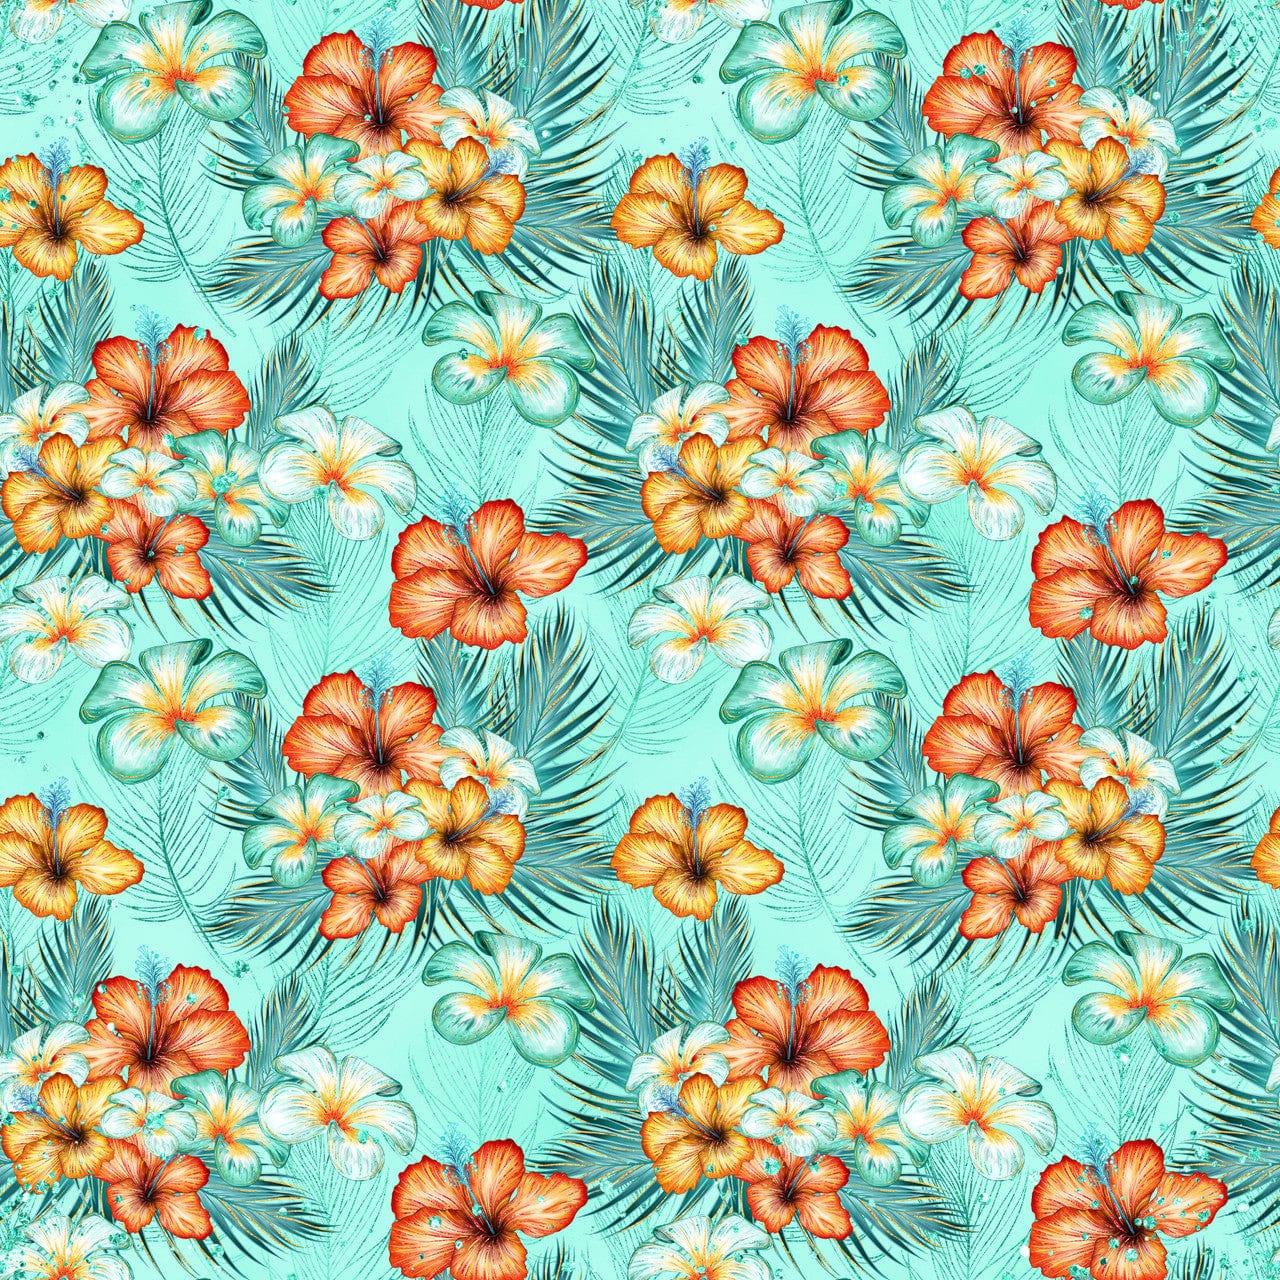  Tropics Collection Coconuts 12 x 12 Double-Sided Scrapbook Paper by SSC Designs - Scrapbook Supply Companies